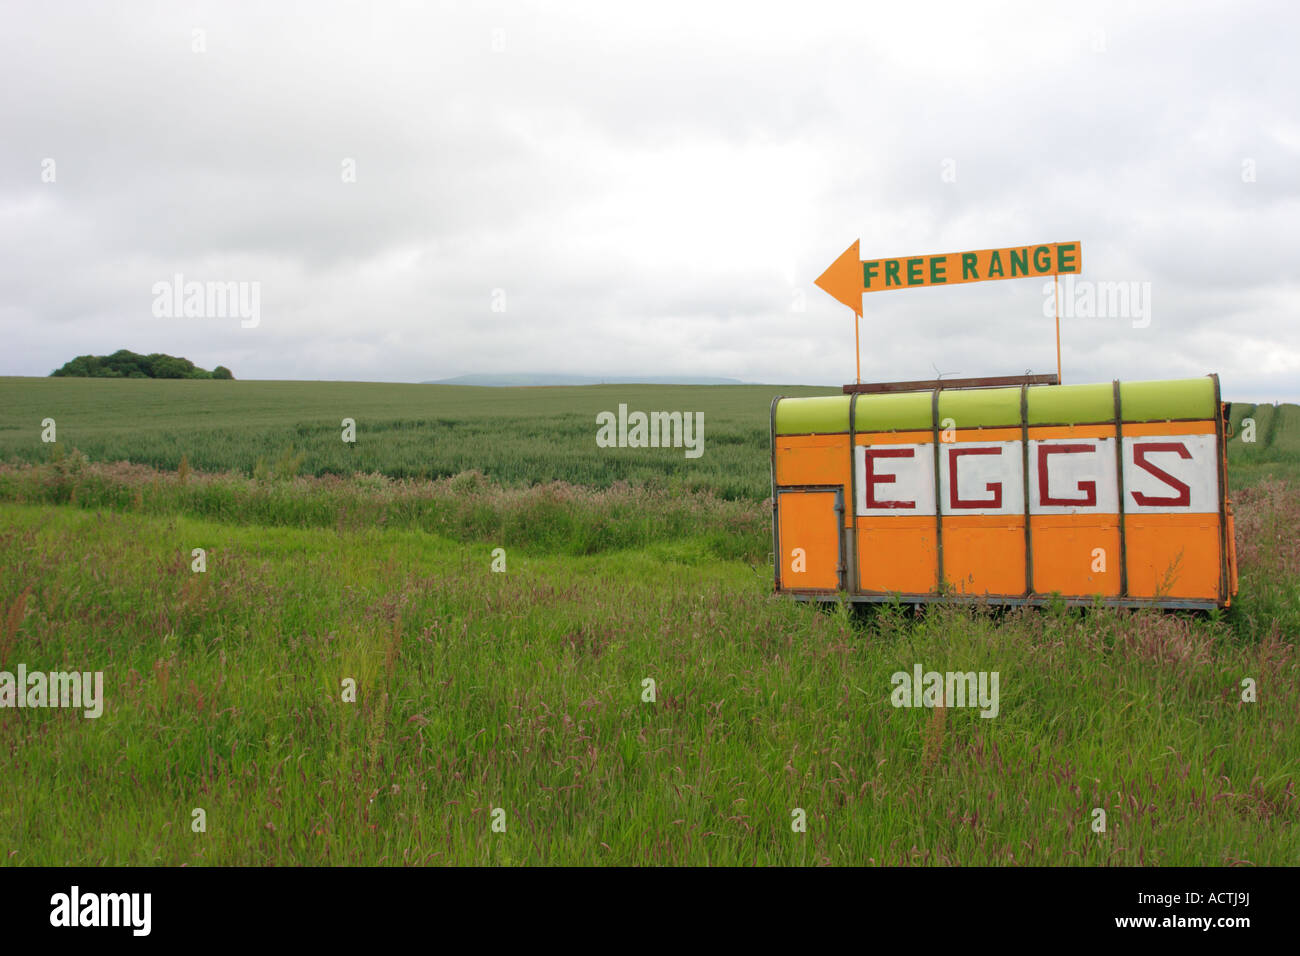 Free Range Eggs For Sale Sign Stock Photo